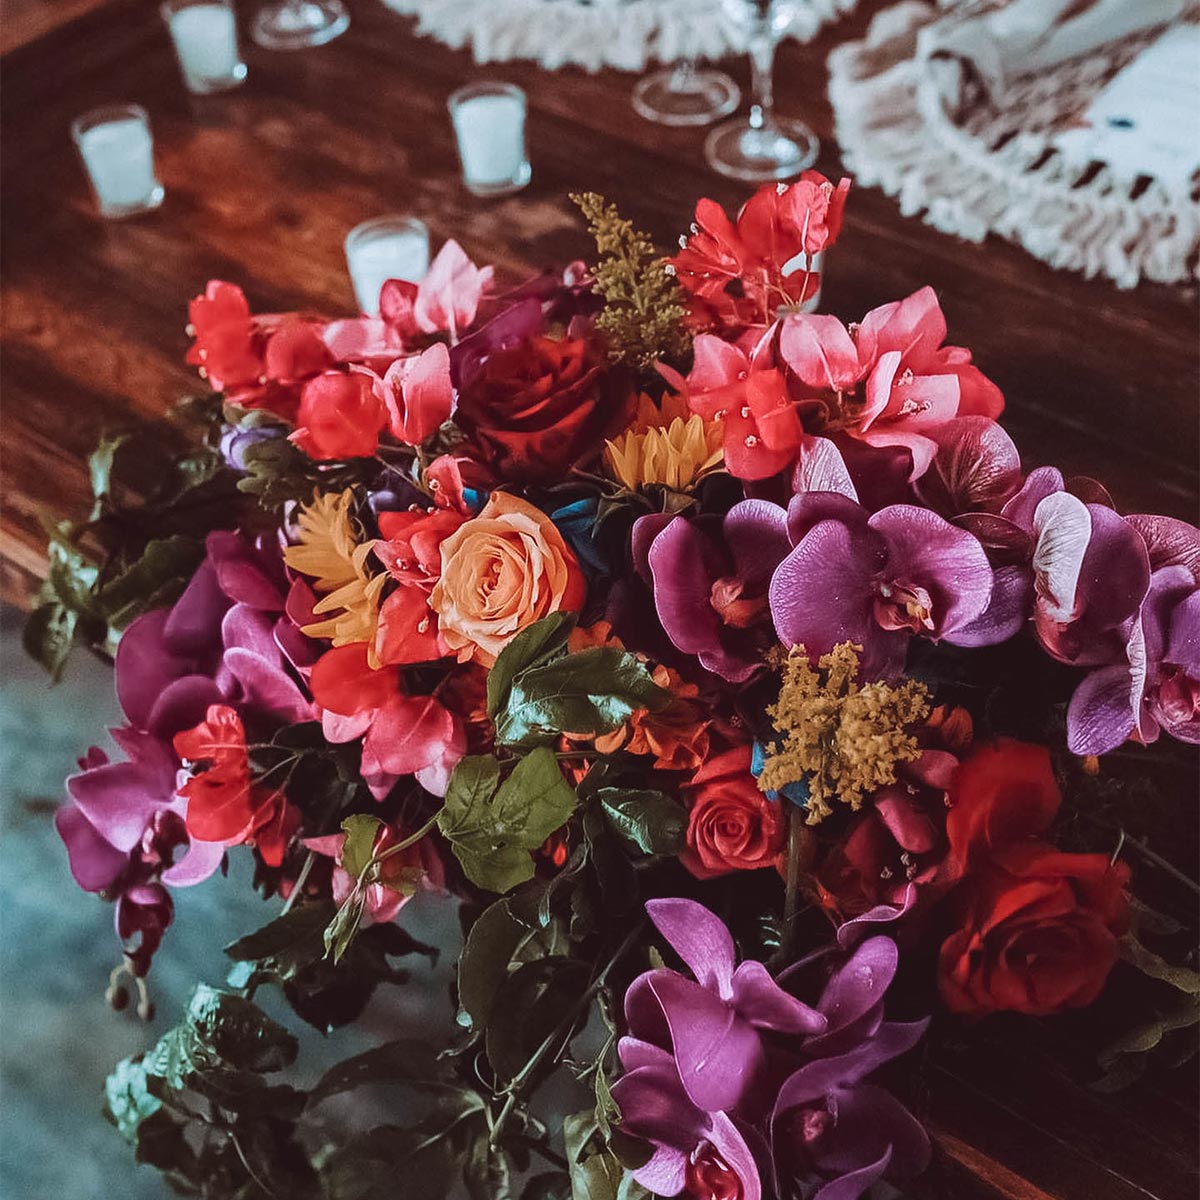 Vibrant floral arrangement with purple orchids, red and pink roses, and greenery on a wooden table set with glasses and candles. Weddings at Fabulous Flowers and Gifts.